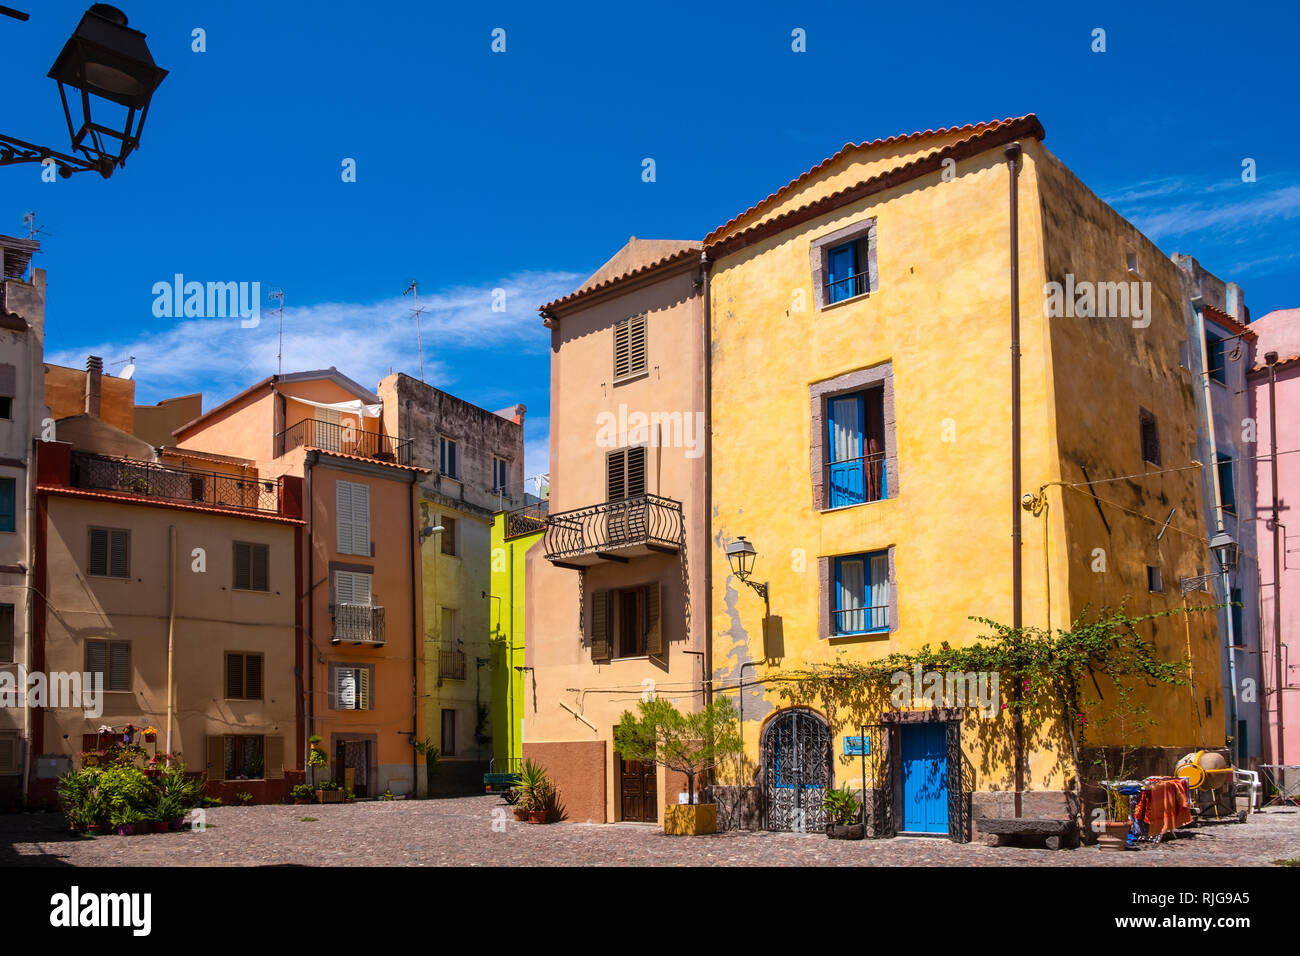 Bosa, Sardinia / Italy - 2018/08/13: Summer view of the Bosa old town quarter with historic colorful tenements and streets Stock Photo